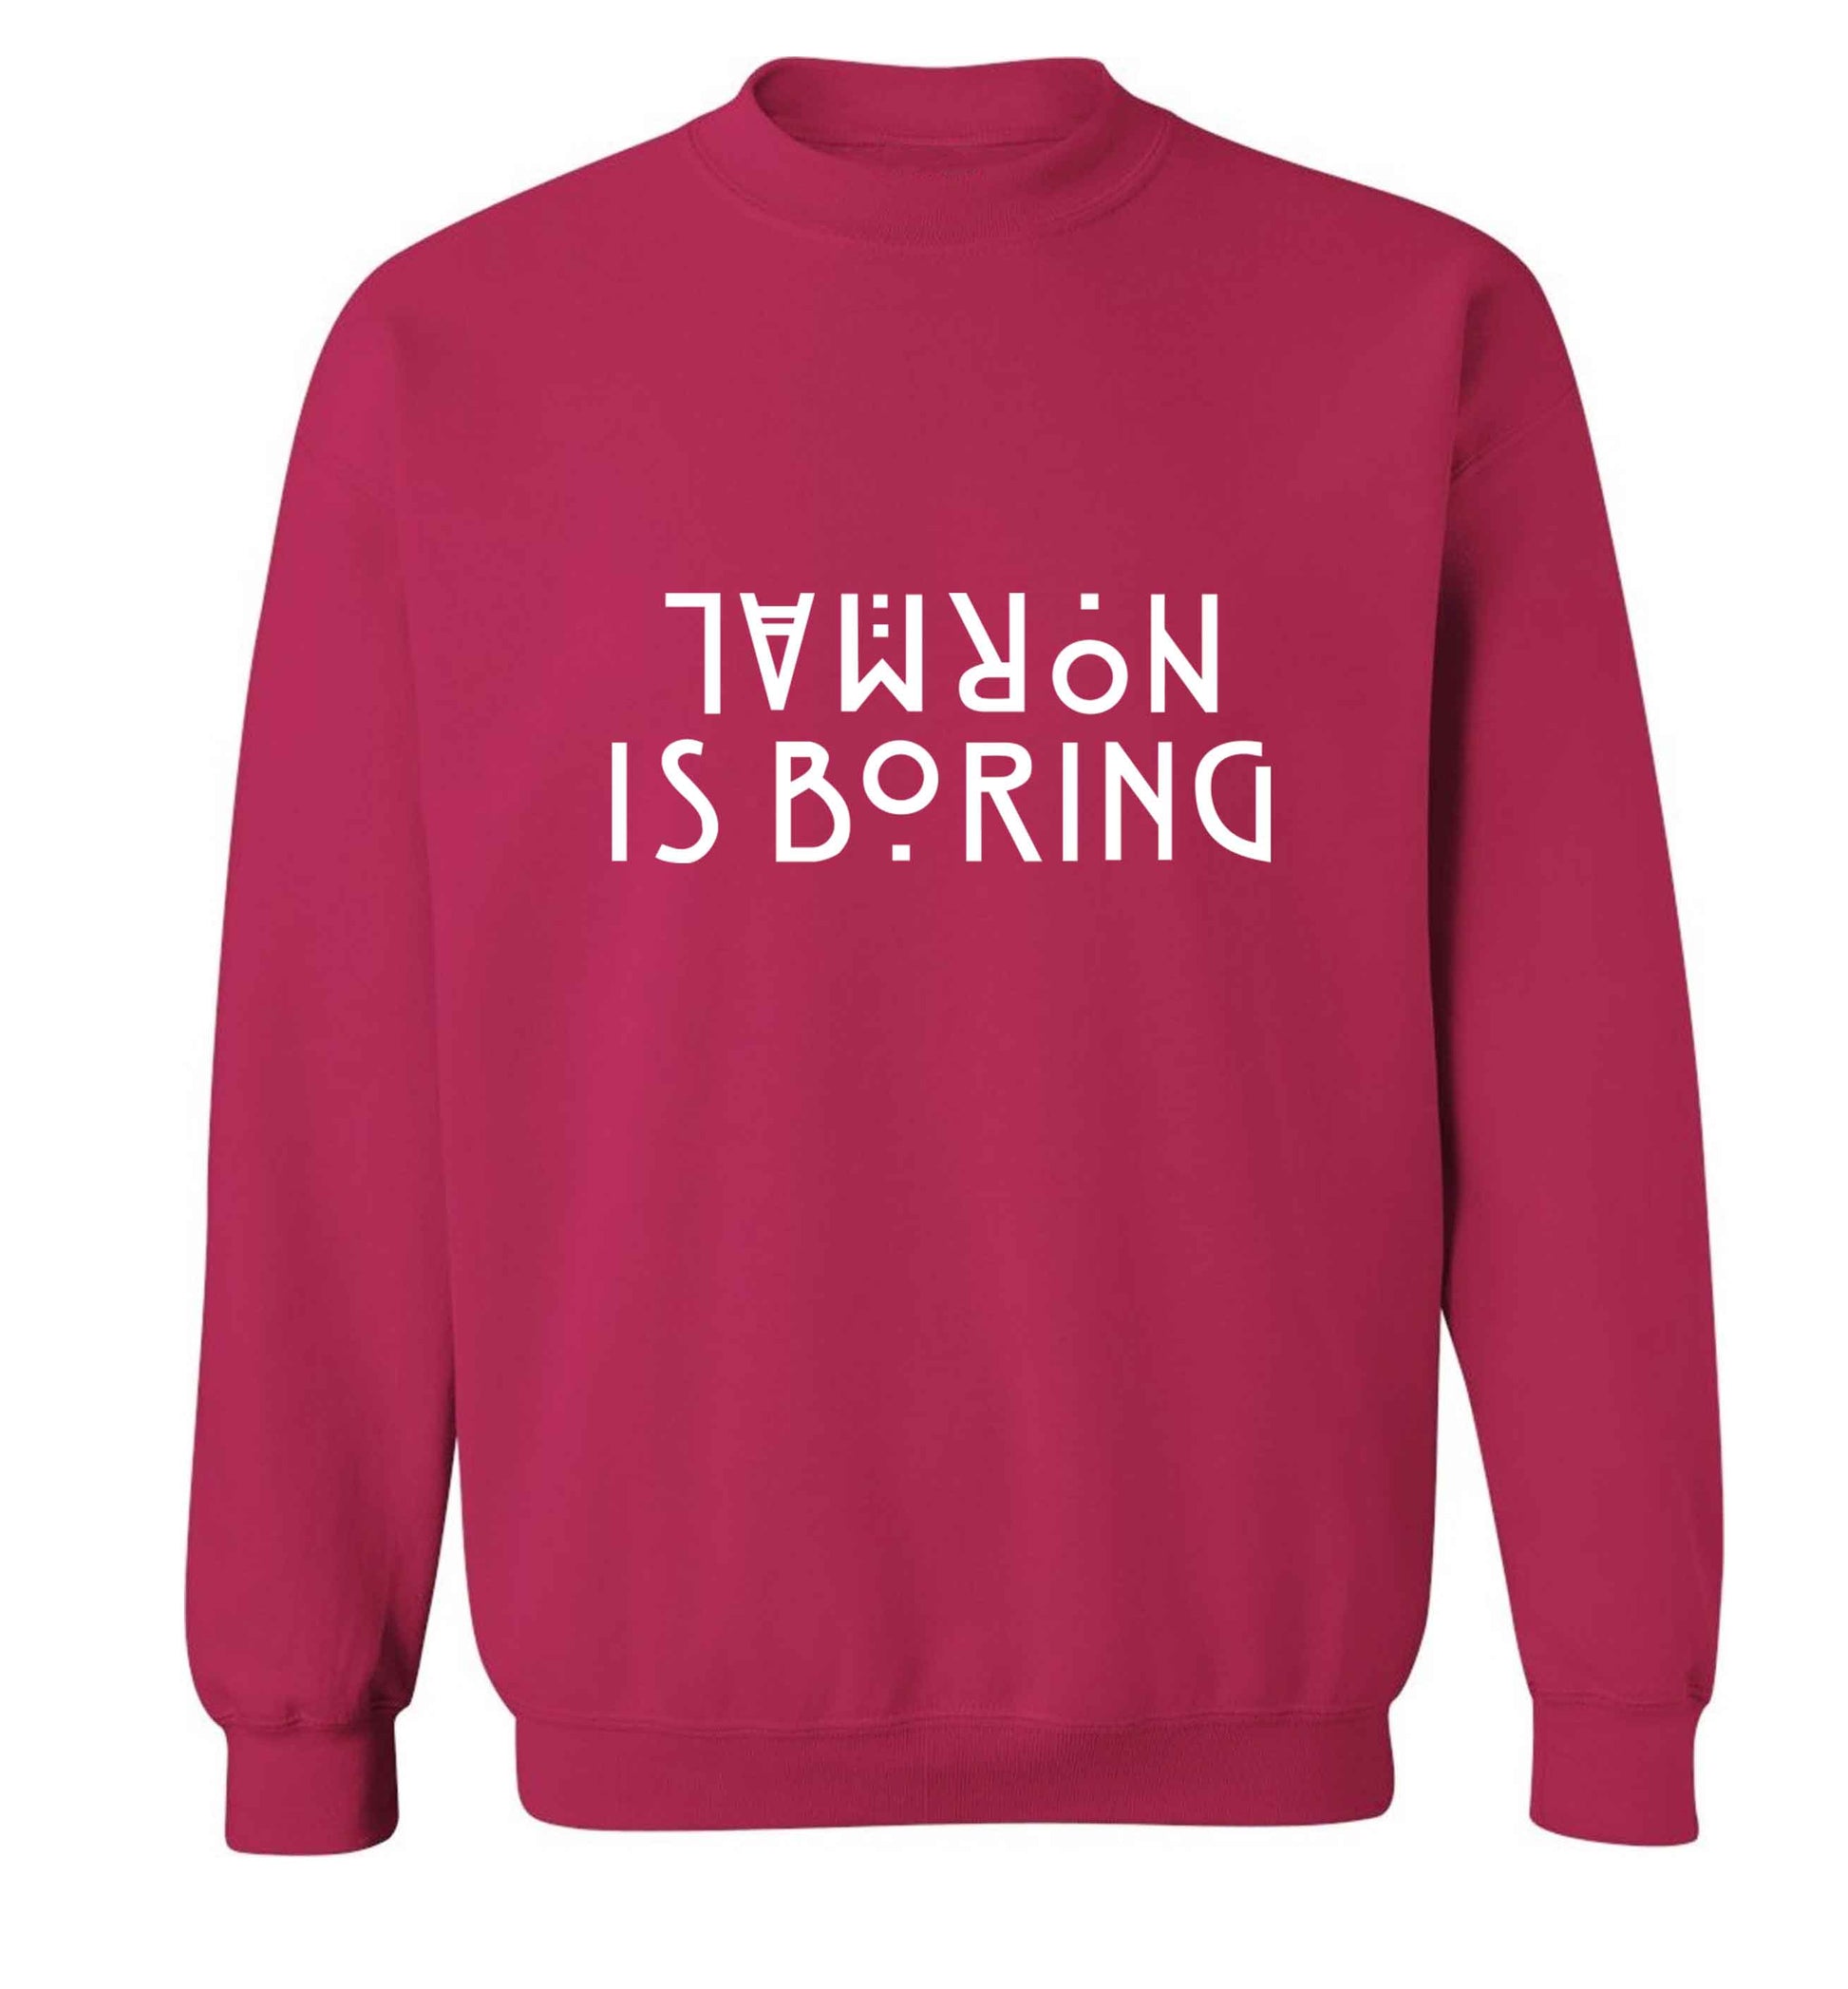 Normal is boring adult's unisex pink sweater 2XL